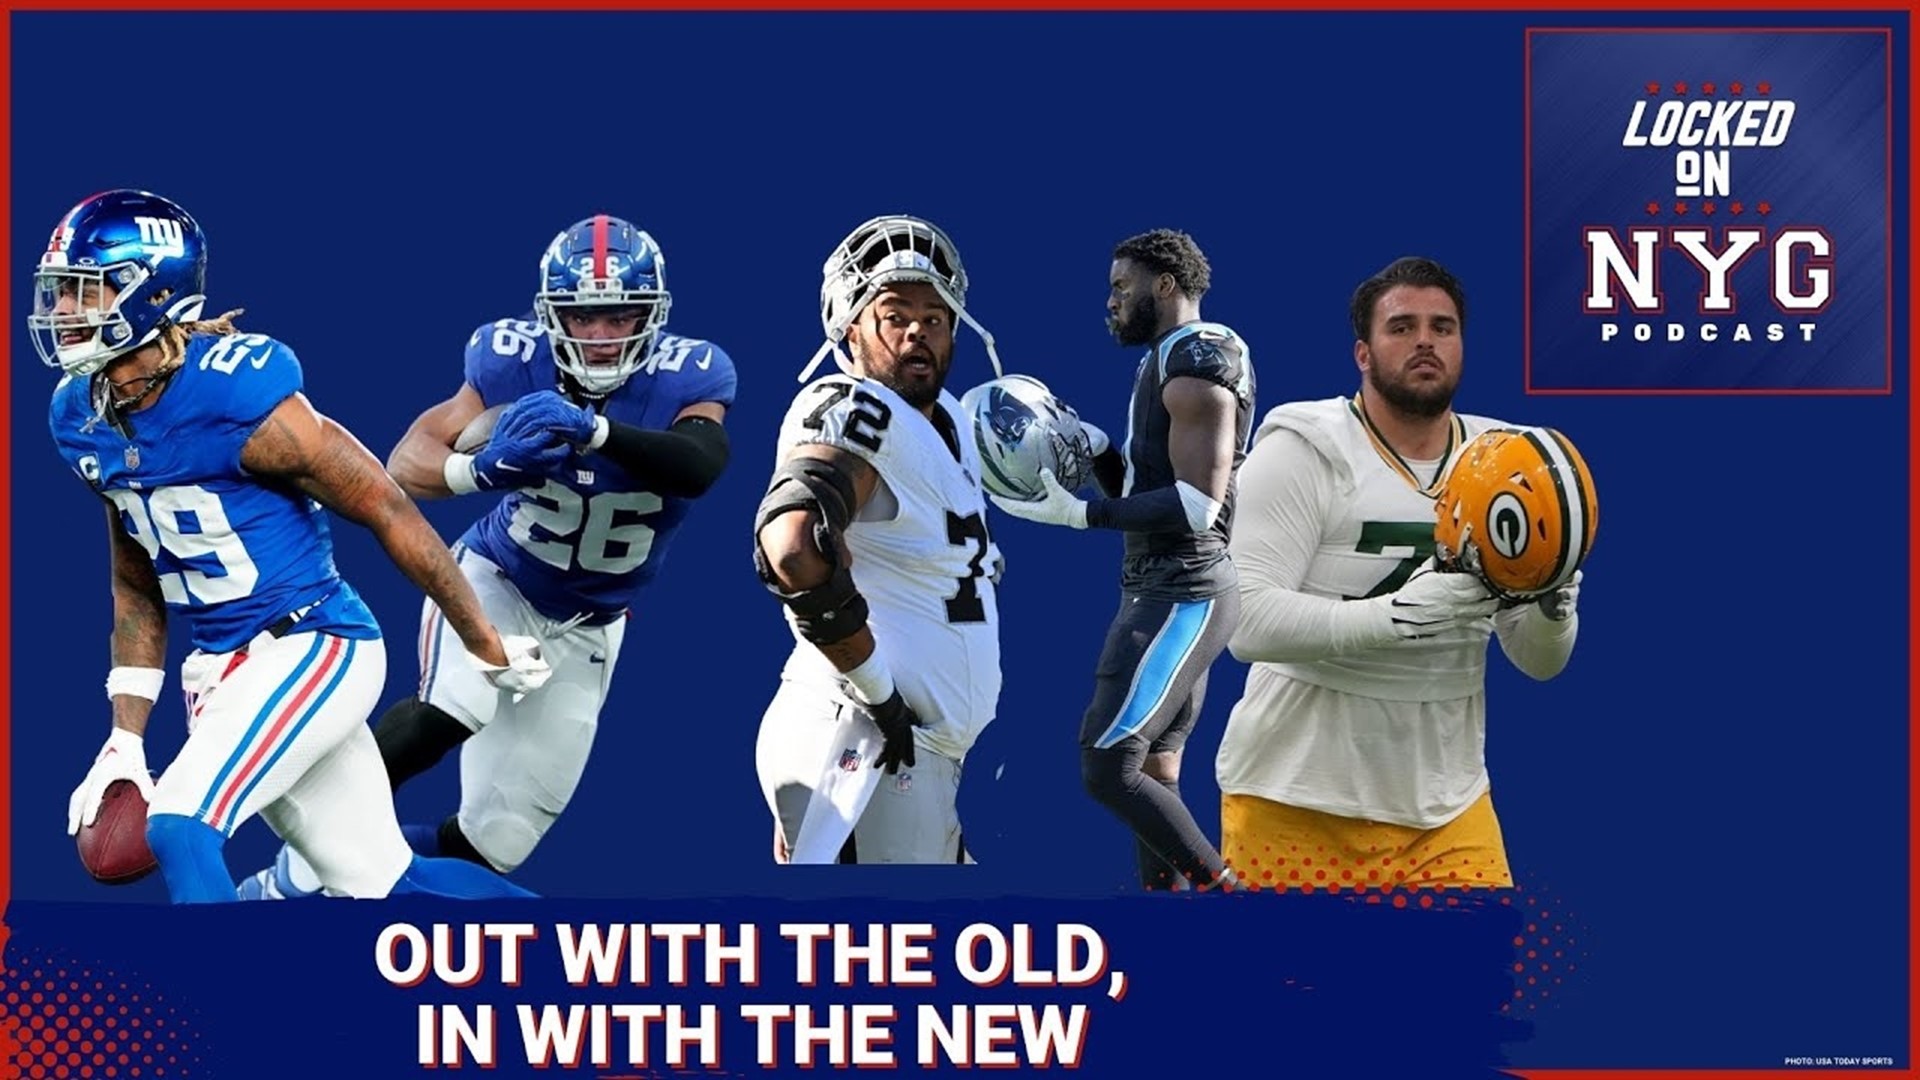 New York Giants Get Busy on First Day of Free Agency Tampering Period